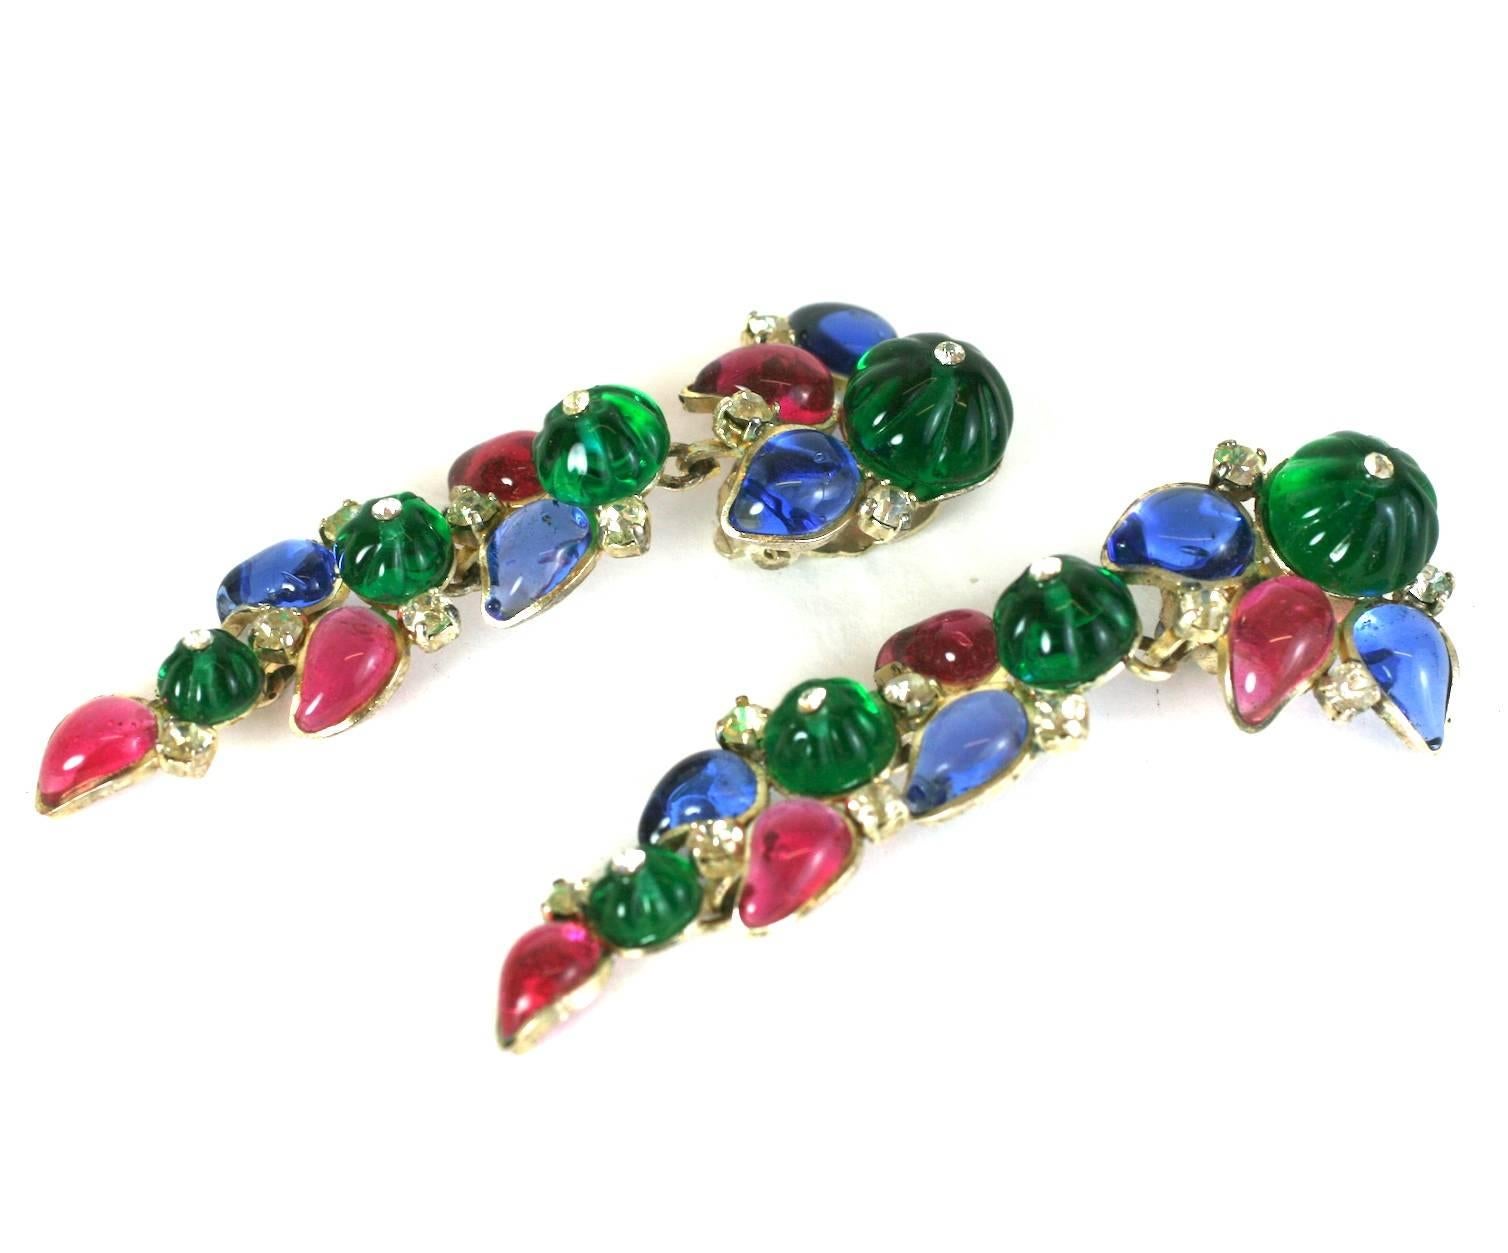 Chanel fully articulated long Fruit Salad Earrings in the Tutti Frutti style popularized by Cartier in the 1930's, made by Maison Gripoix, Paris. Handmade with faux emerald fluted cabochons, poured glass ruby and sapphire leaves and Swarovski